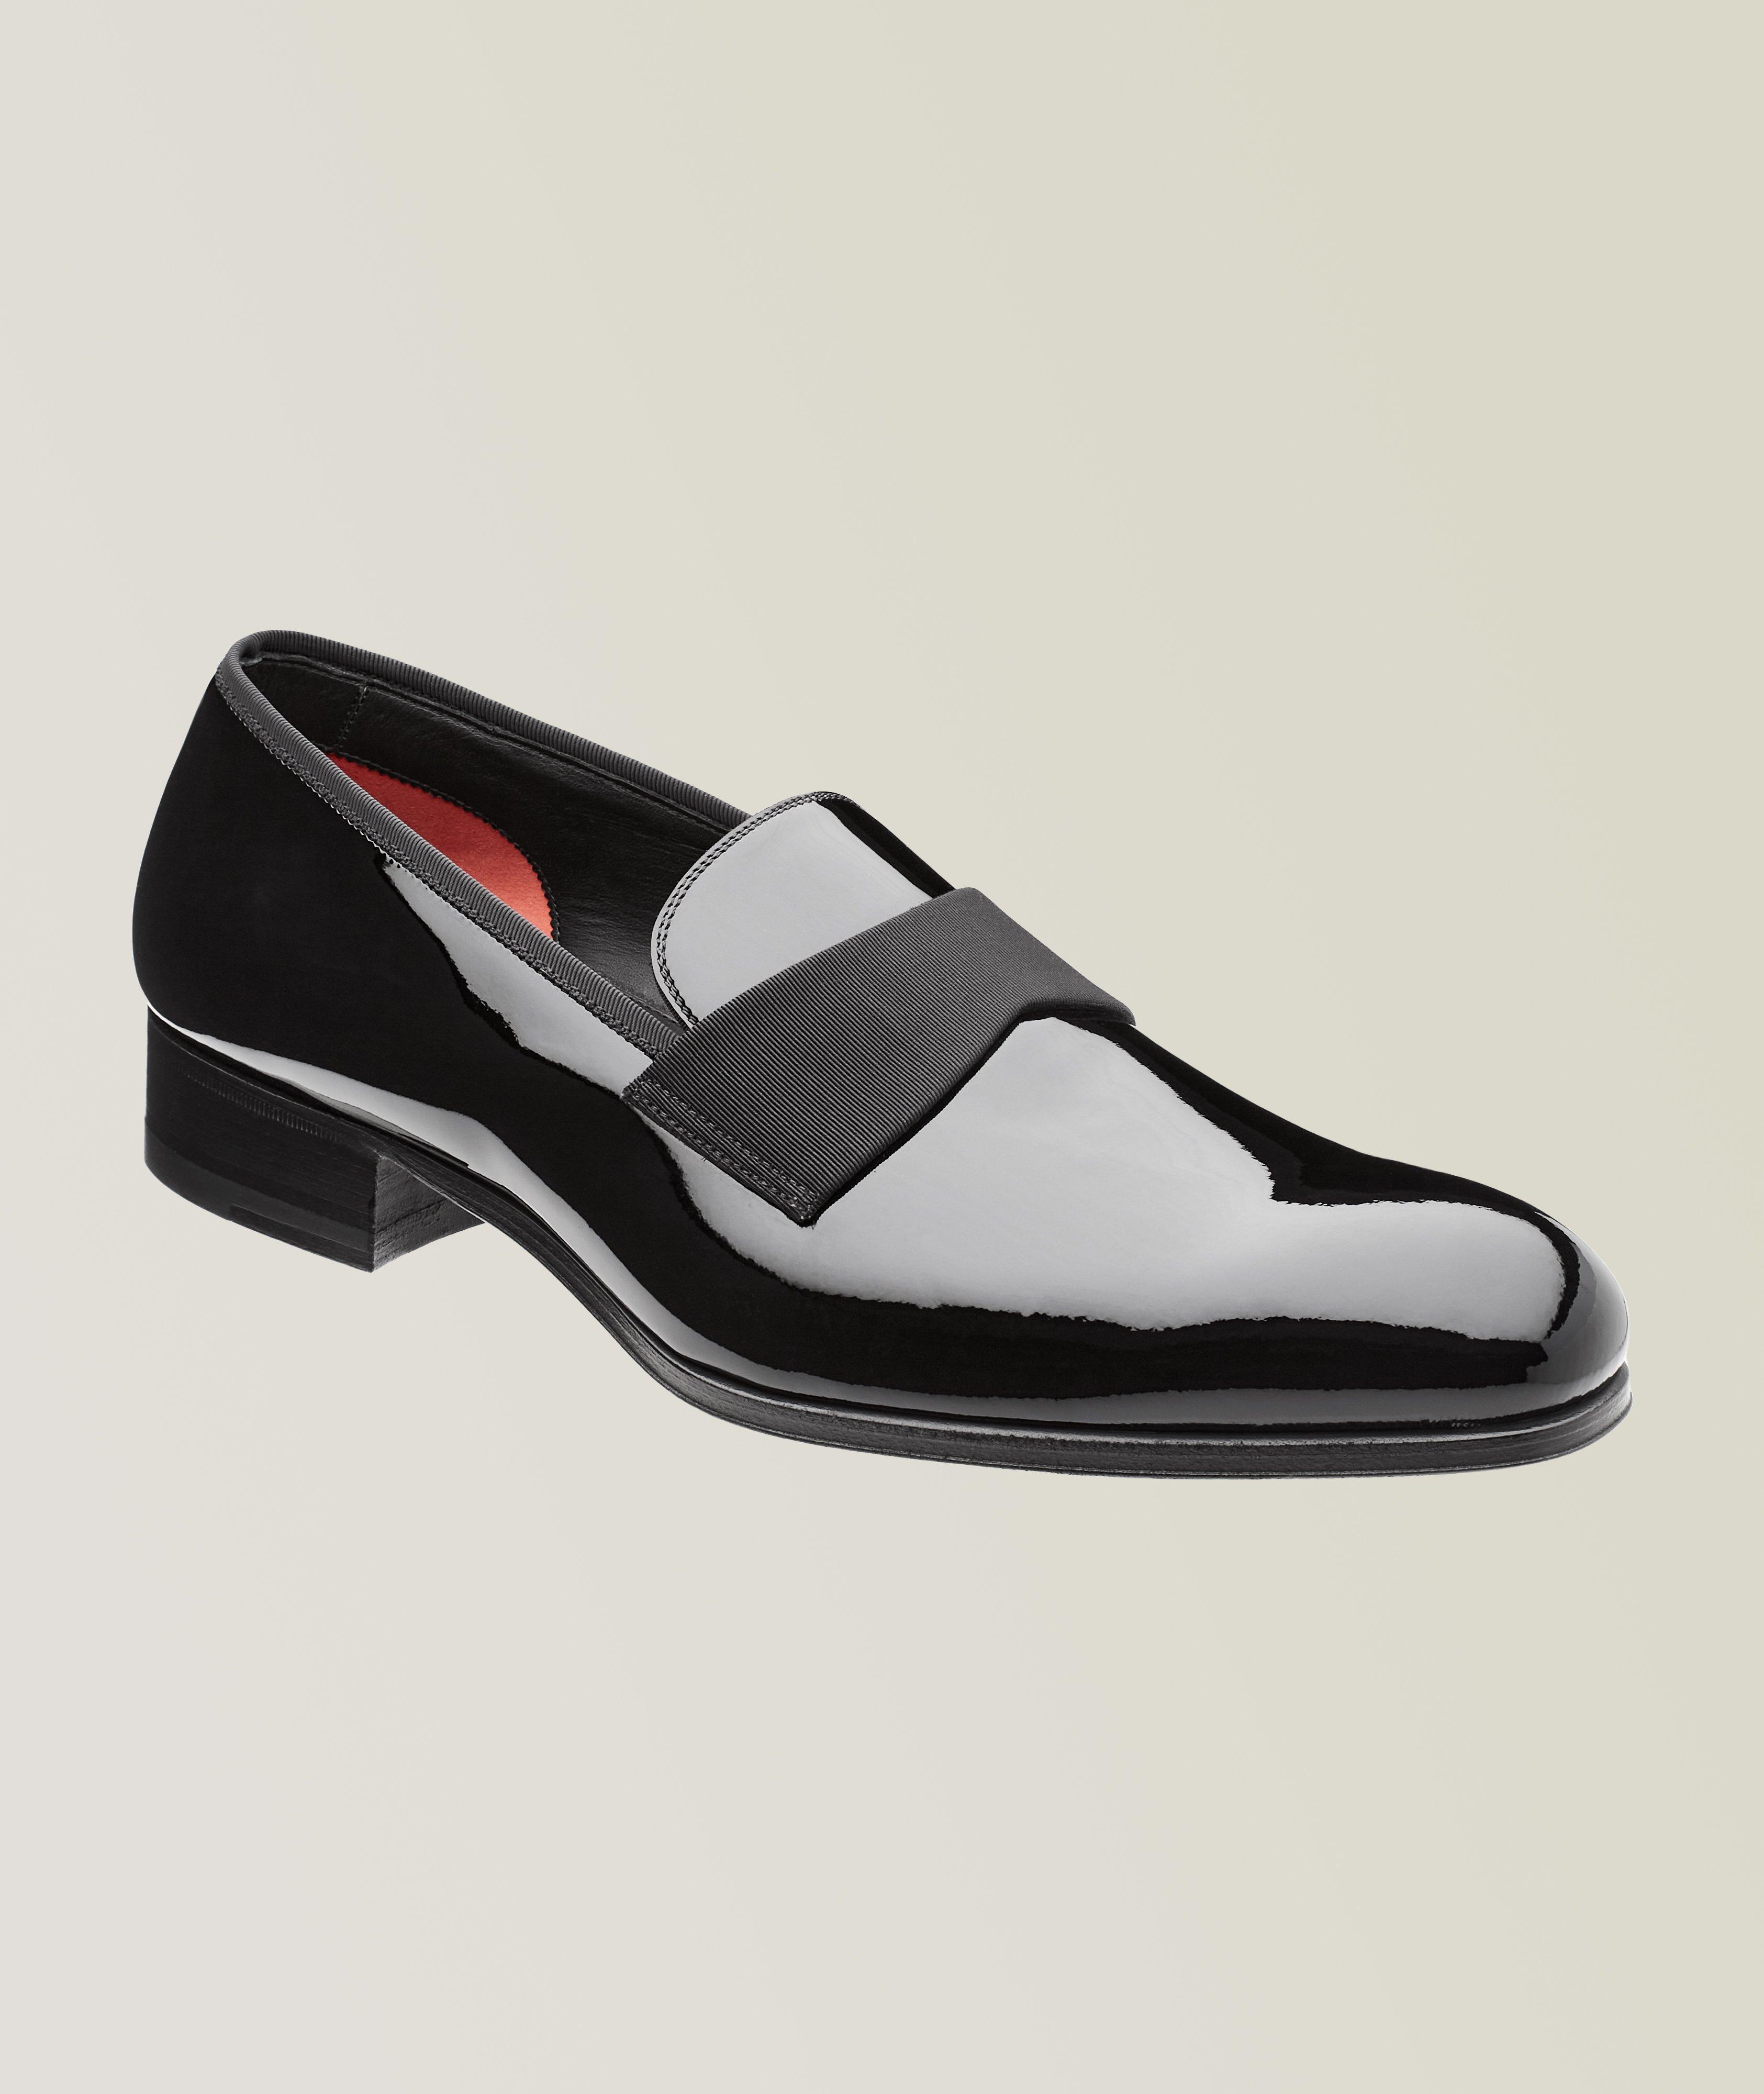 Patent Leather Edgar Loafers image 0